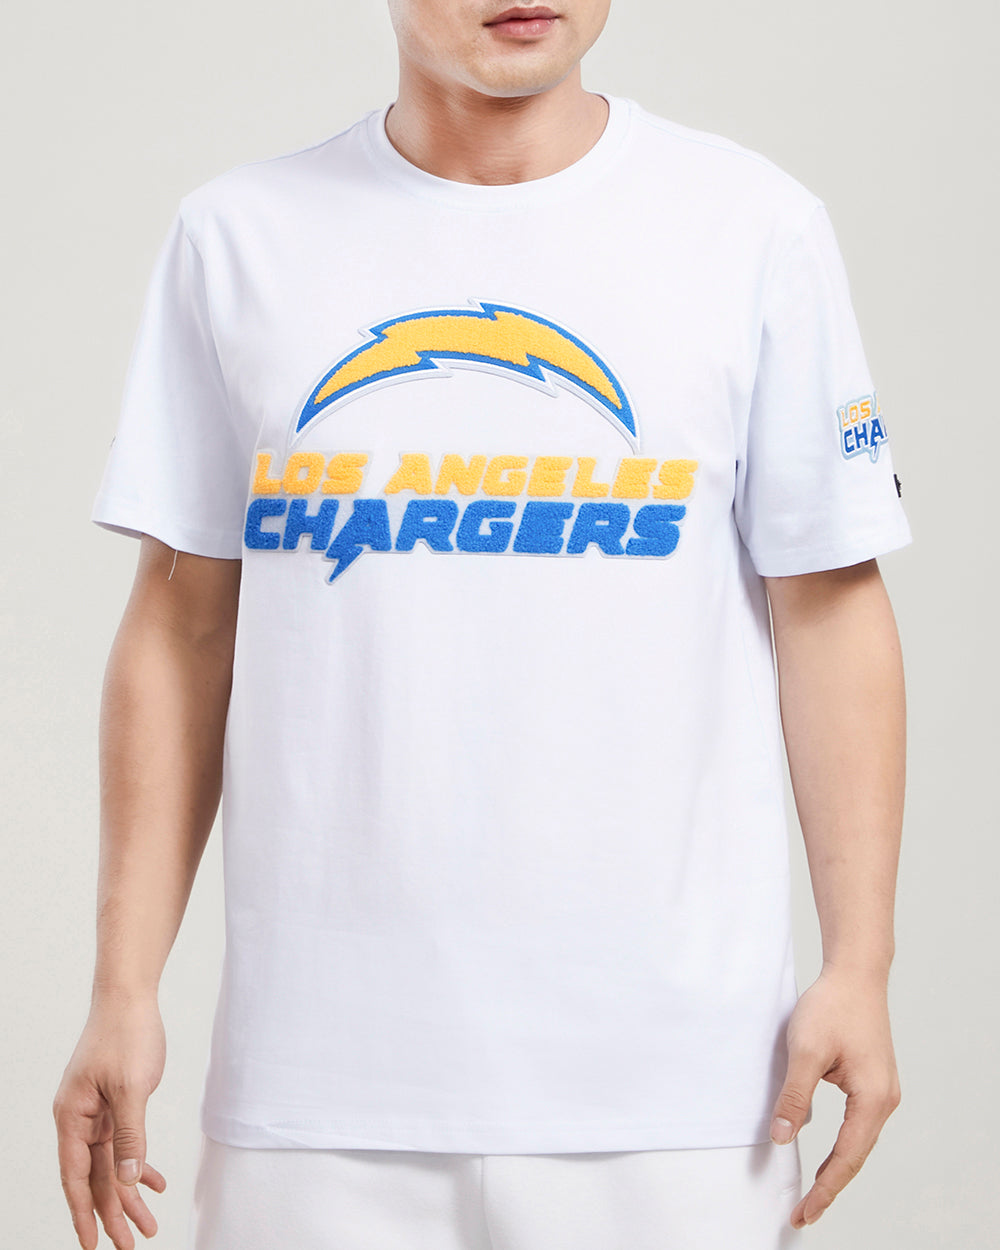 LOS ANGELES CHARGERS MASH UP PRO TEAM SHIRT (WHITE)